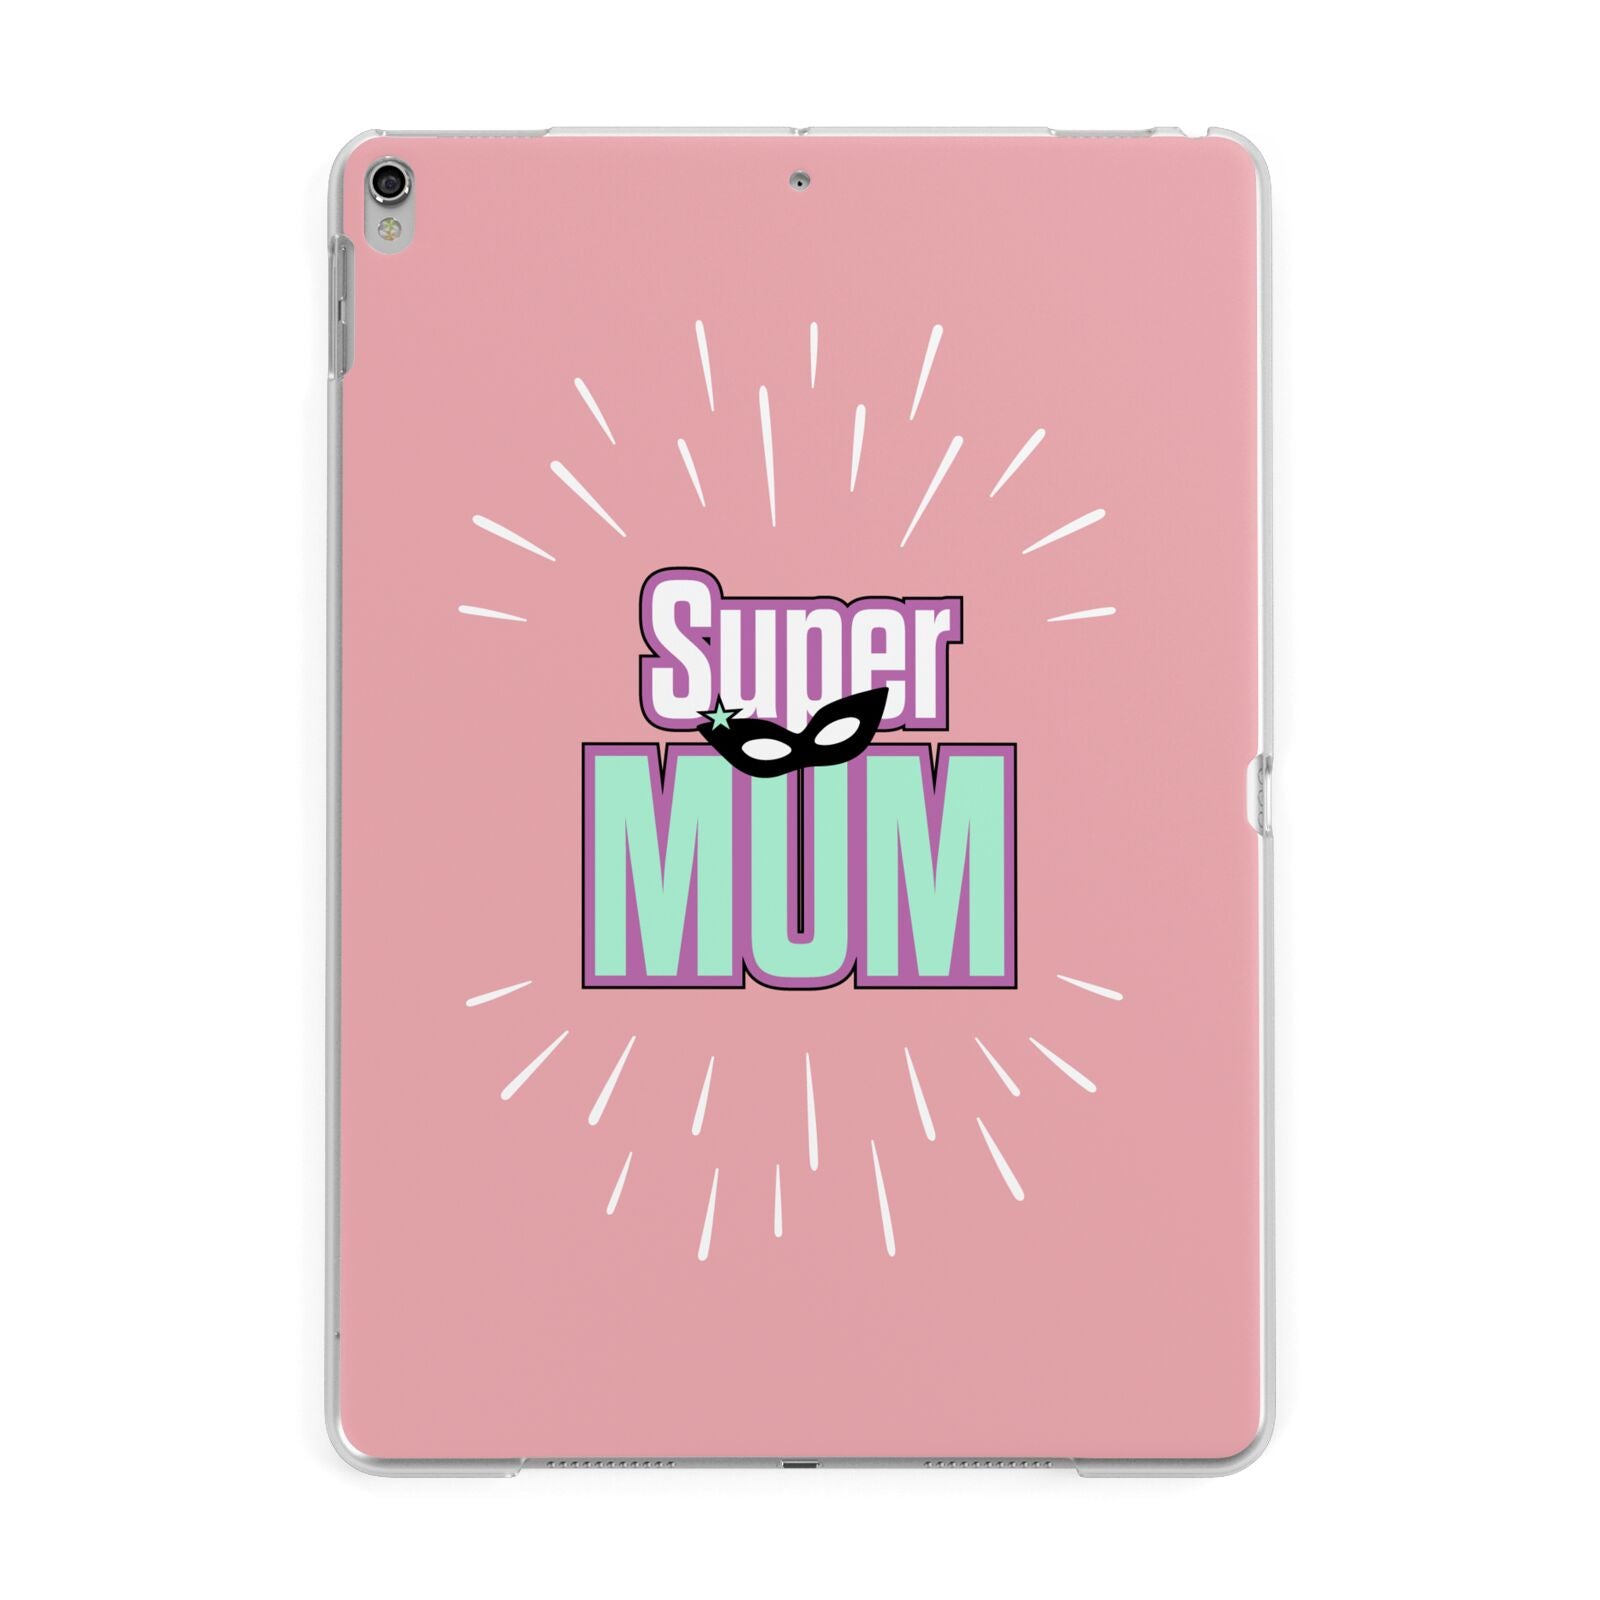 Super Mum Mothers Day Apple iPad Silver Case